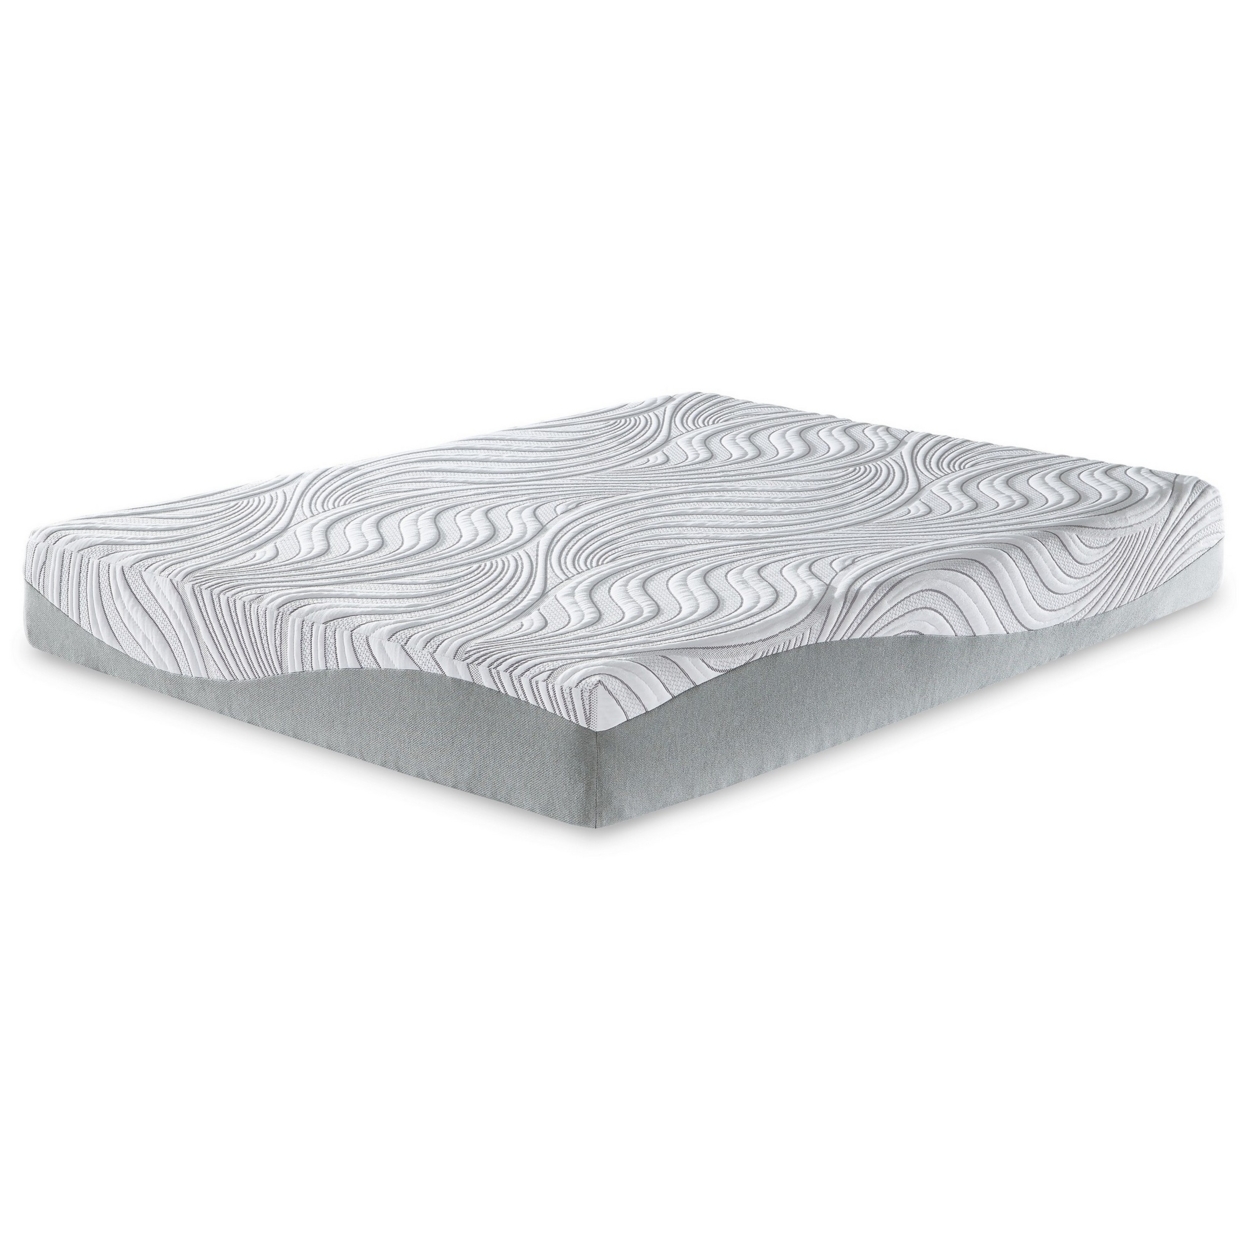 10 Inch Memory Foam Queen Mattress, White And Gray, Stretch Knit Cover